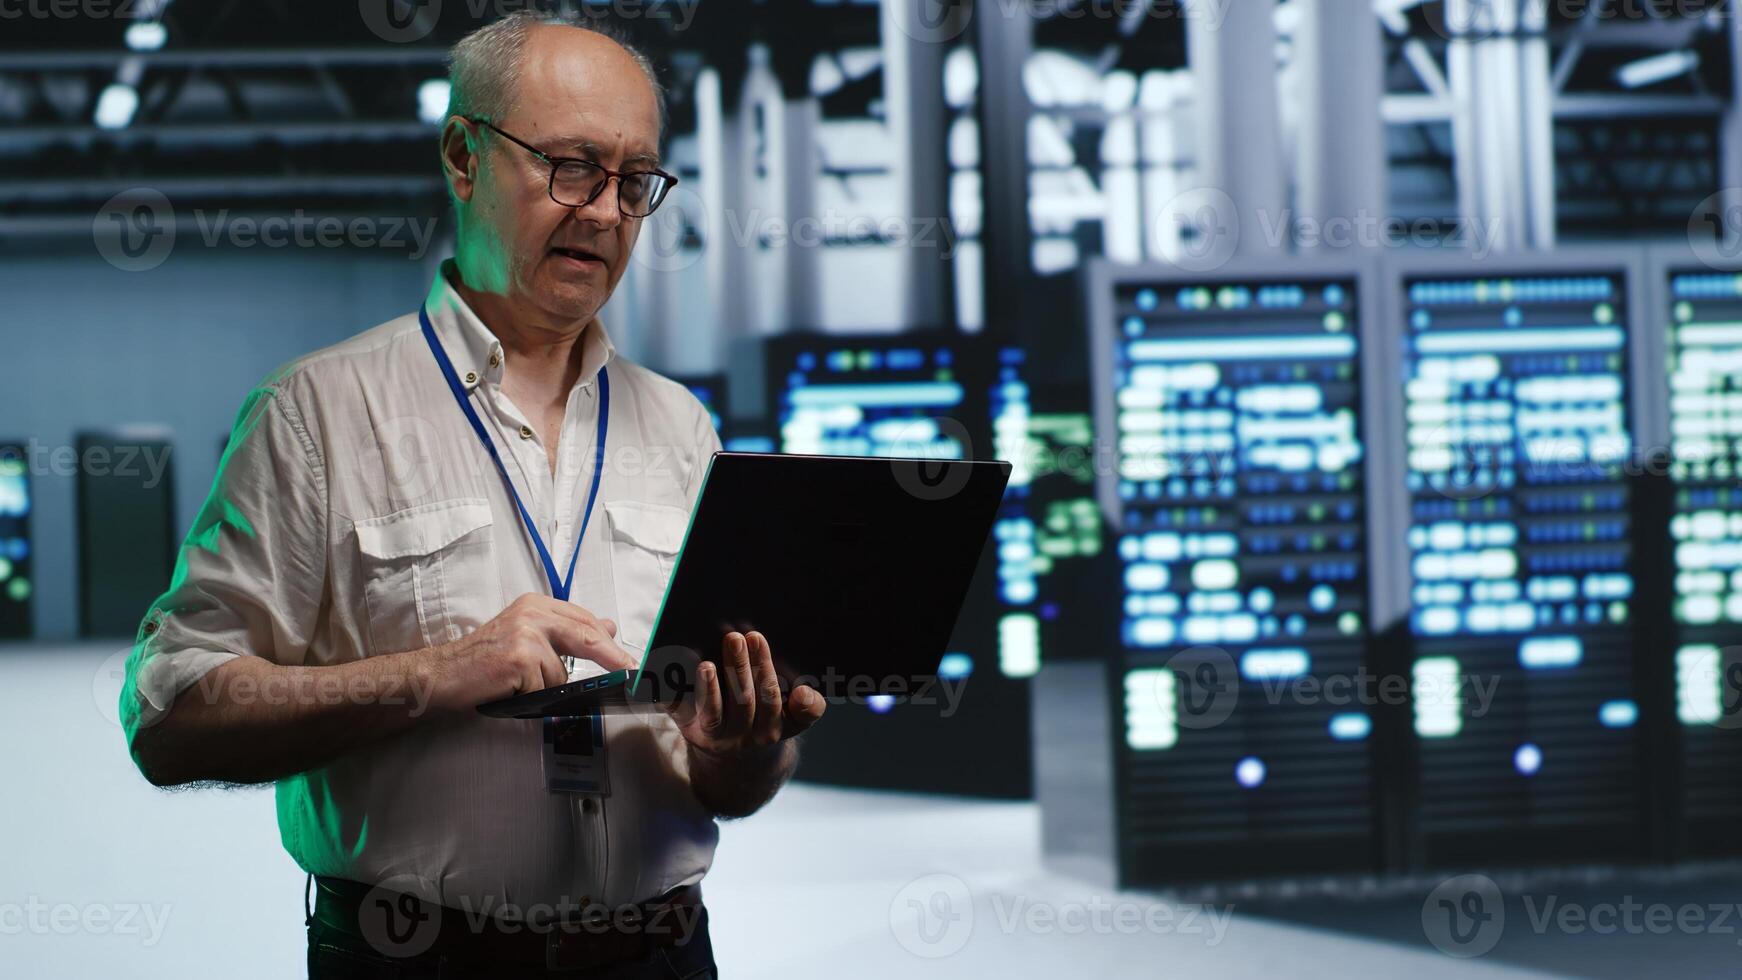 Skillful IT professional navigating network of servers in industrial facility. Developer with laptop in hand ensuring seamless operations, doing optimizations and maintenance in data center photo